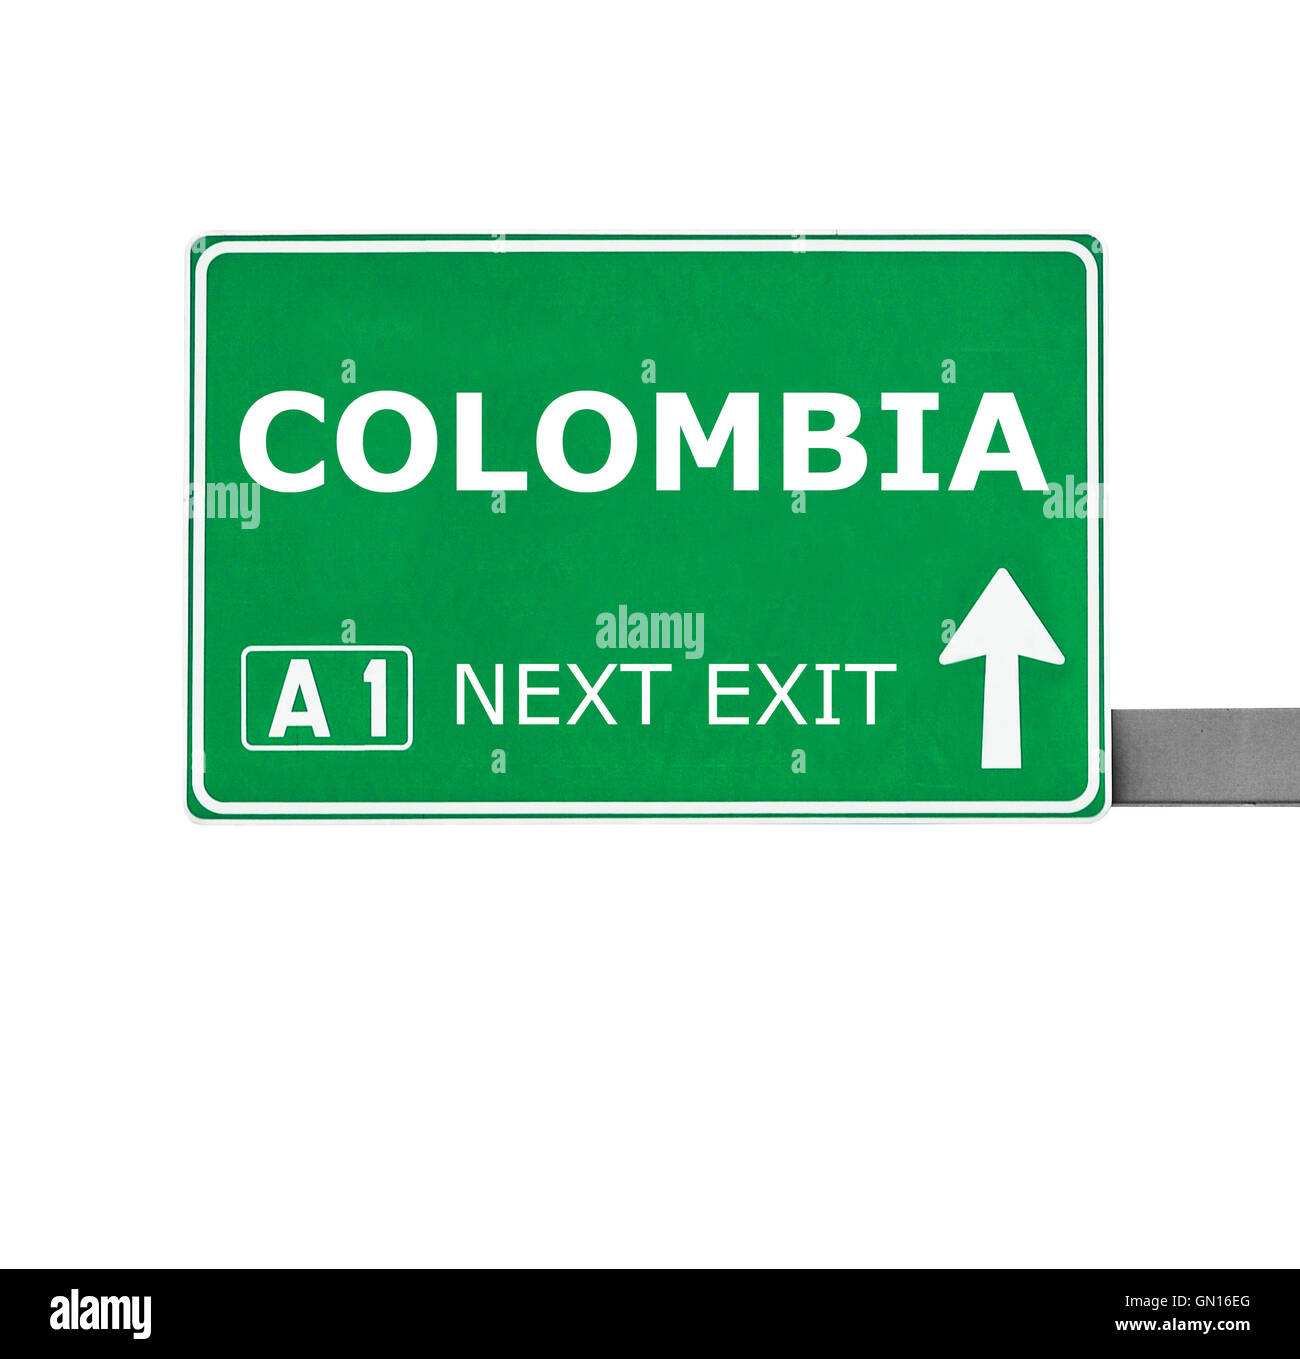 Colombie road sign isolated on white Banque D'Images